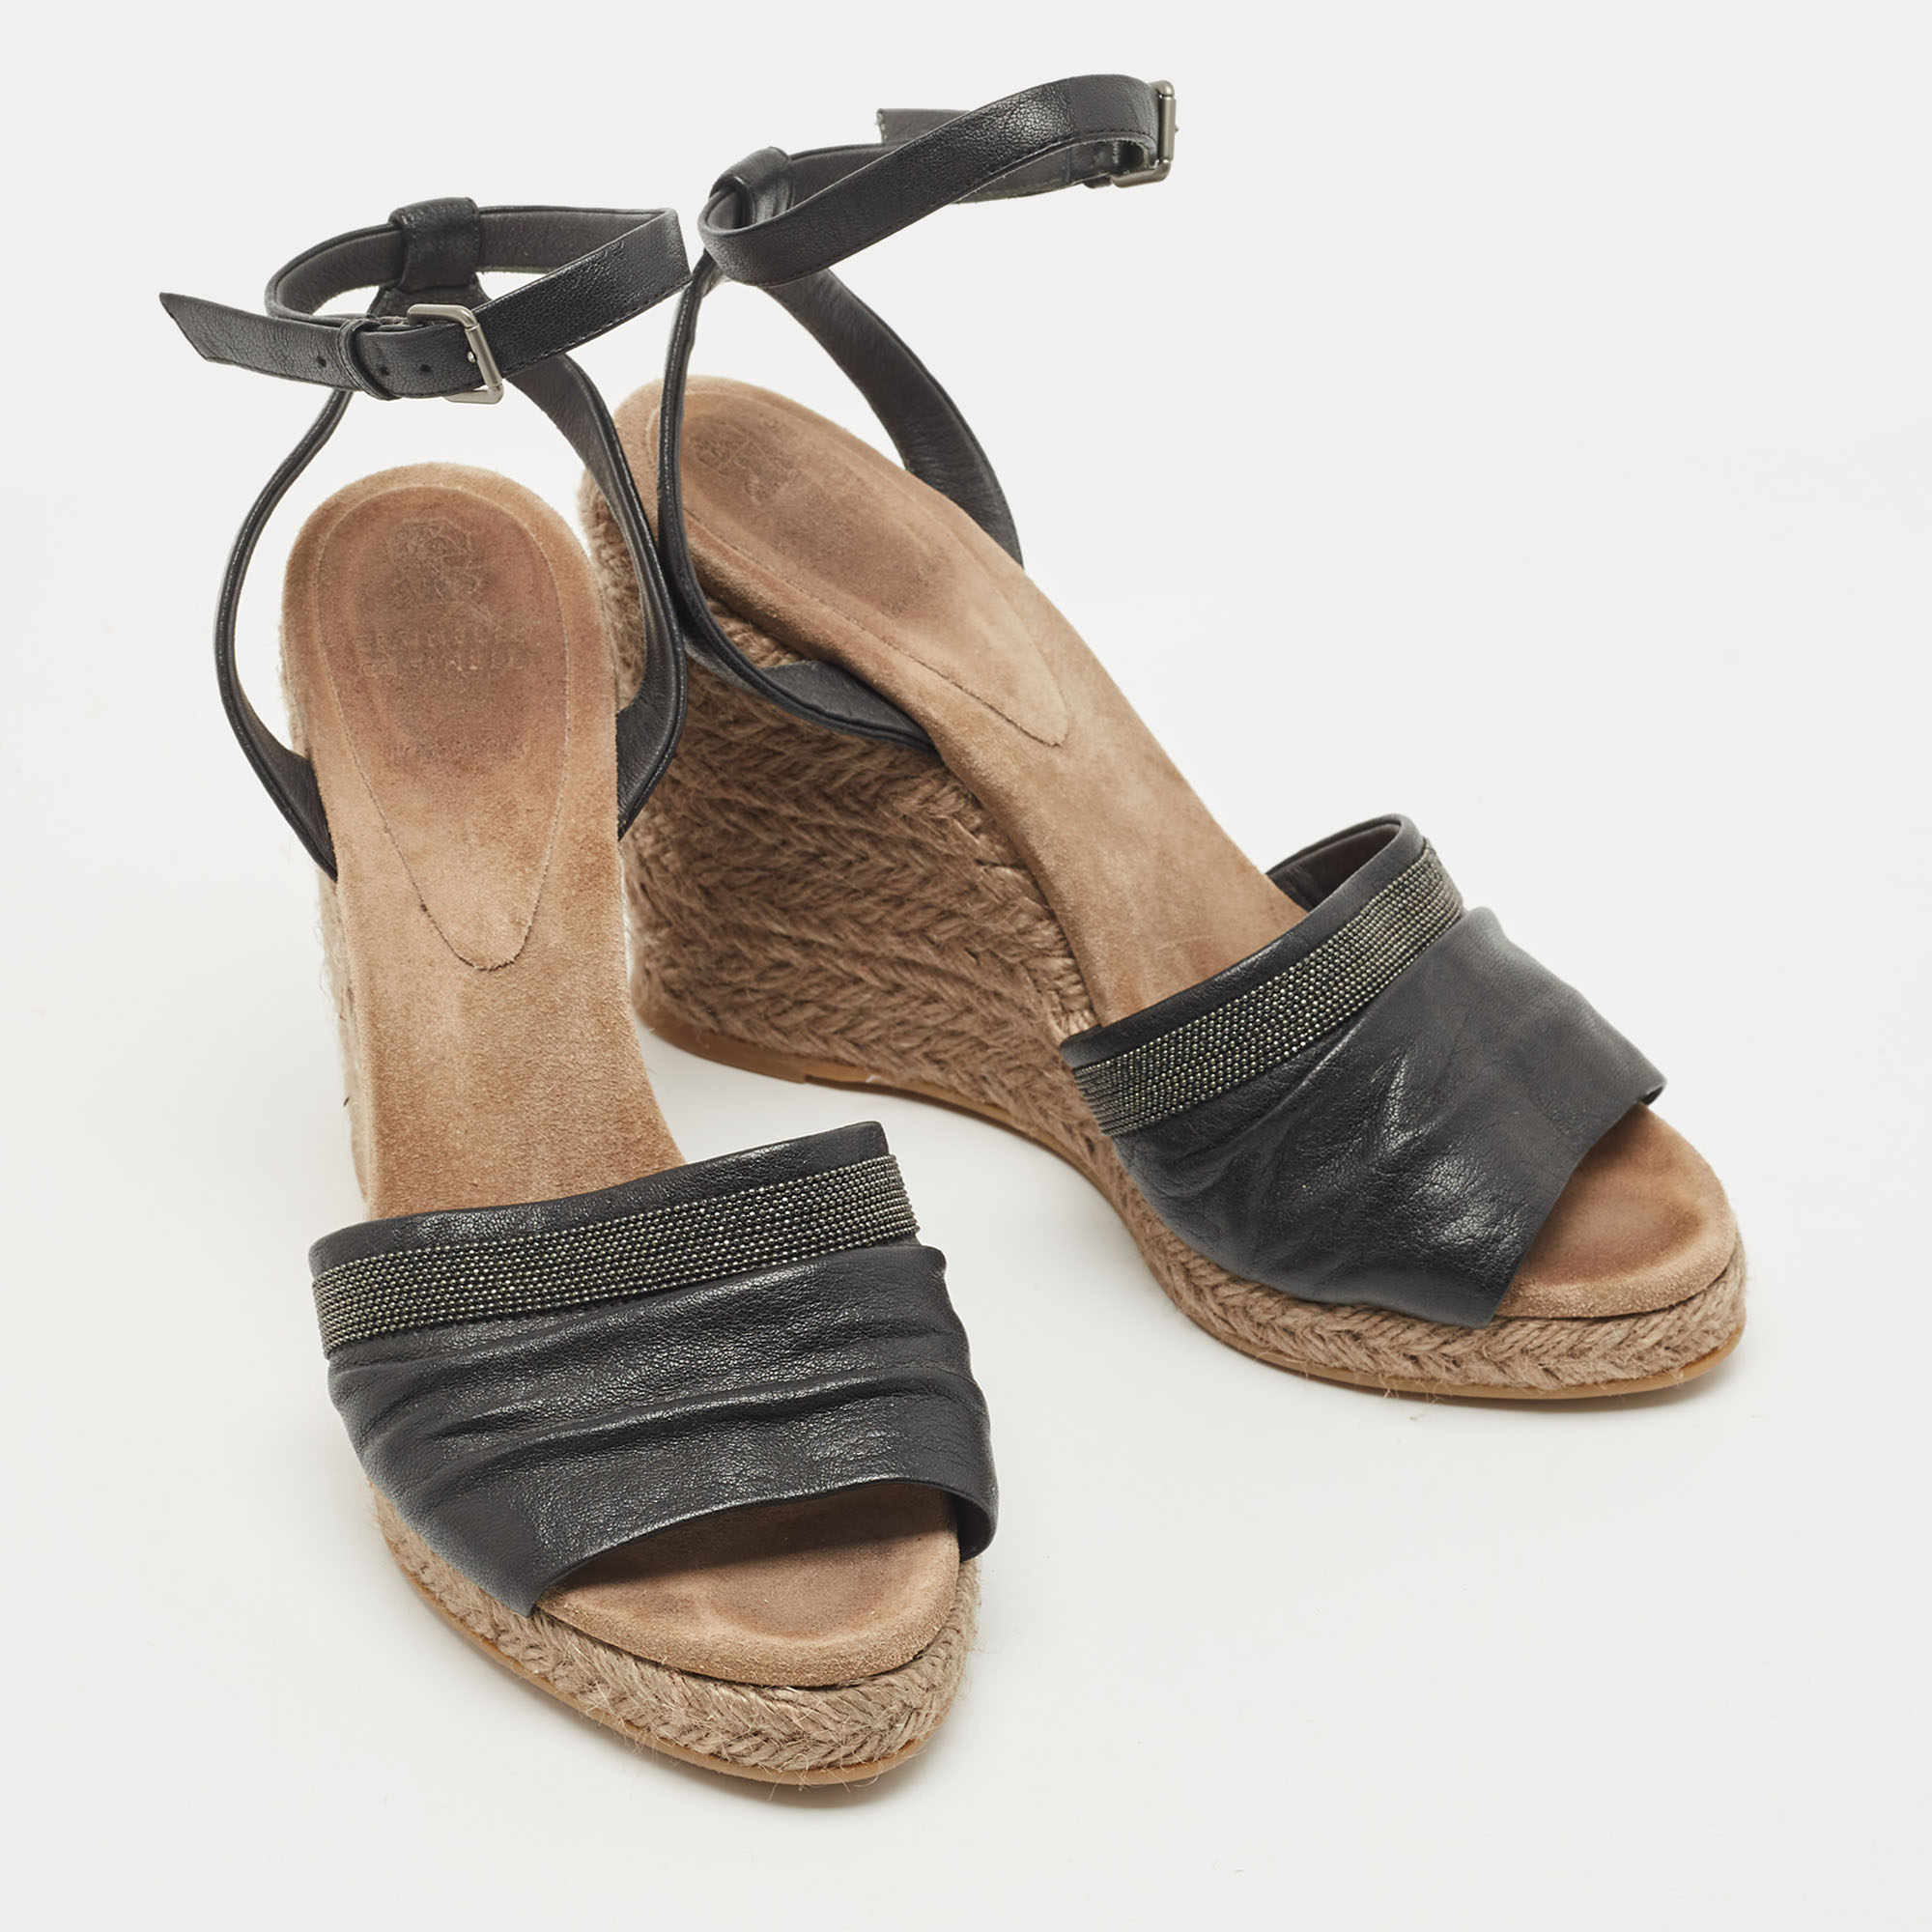 Brunello Cucinelli Black Leather Ankle Strap Wedge Sandals Size 40